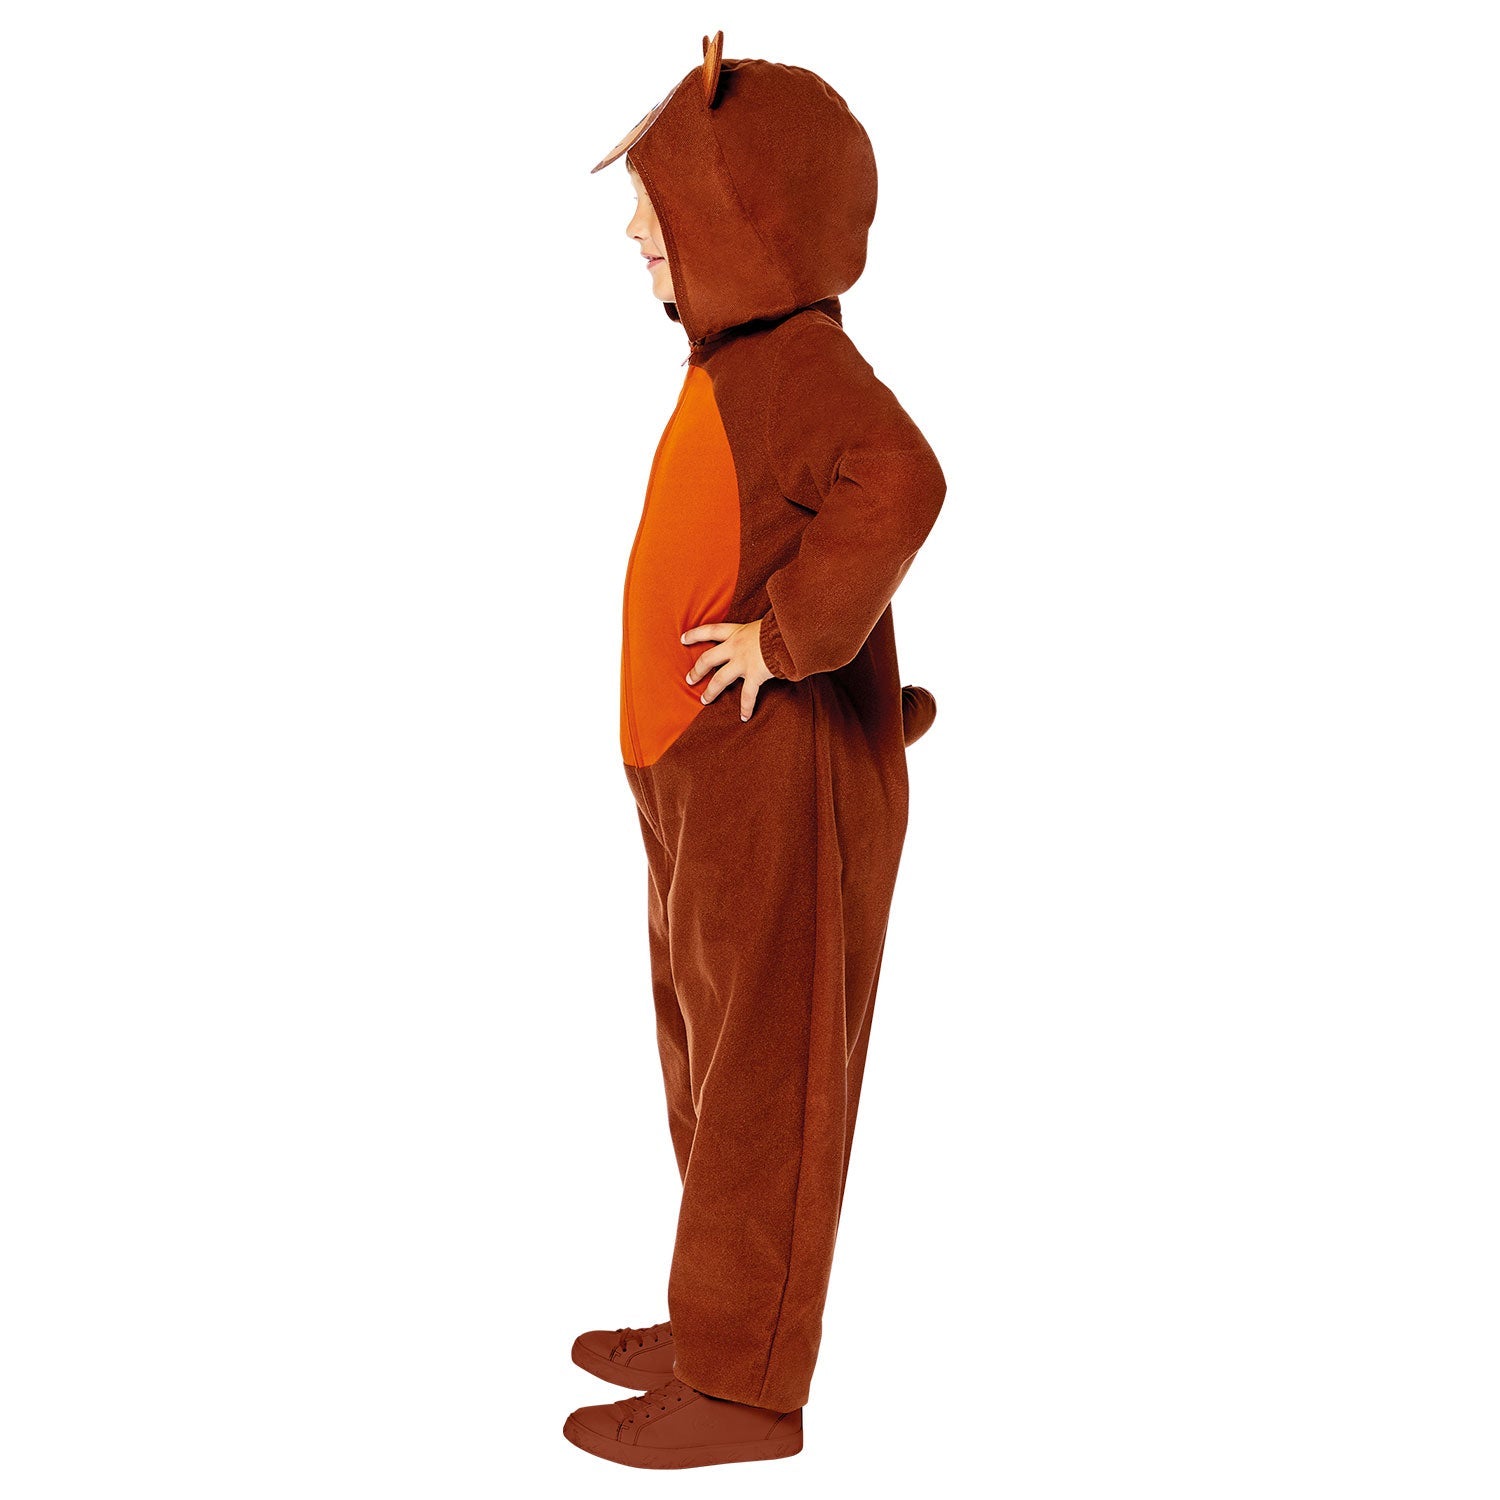 Bear Onesie Costume includes jumpsuit with hood